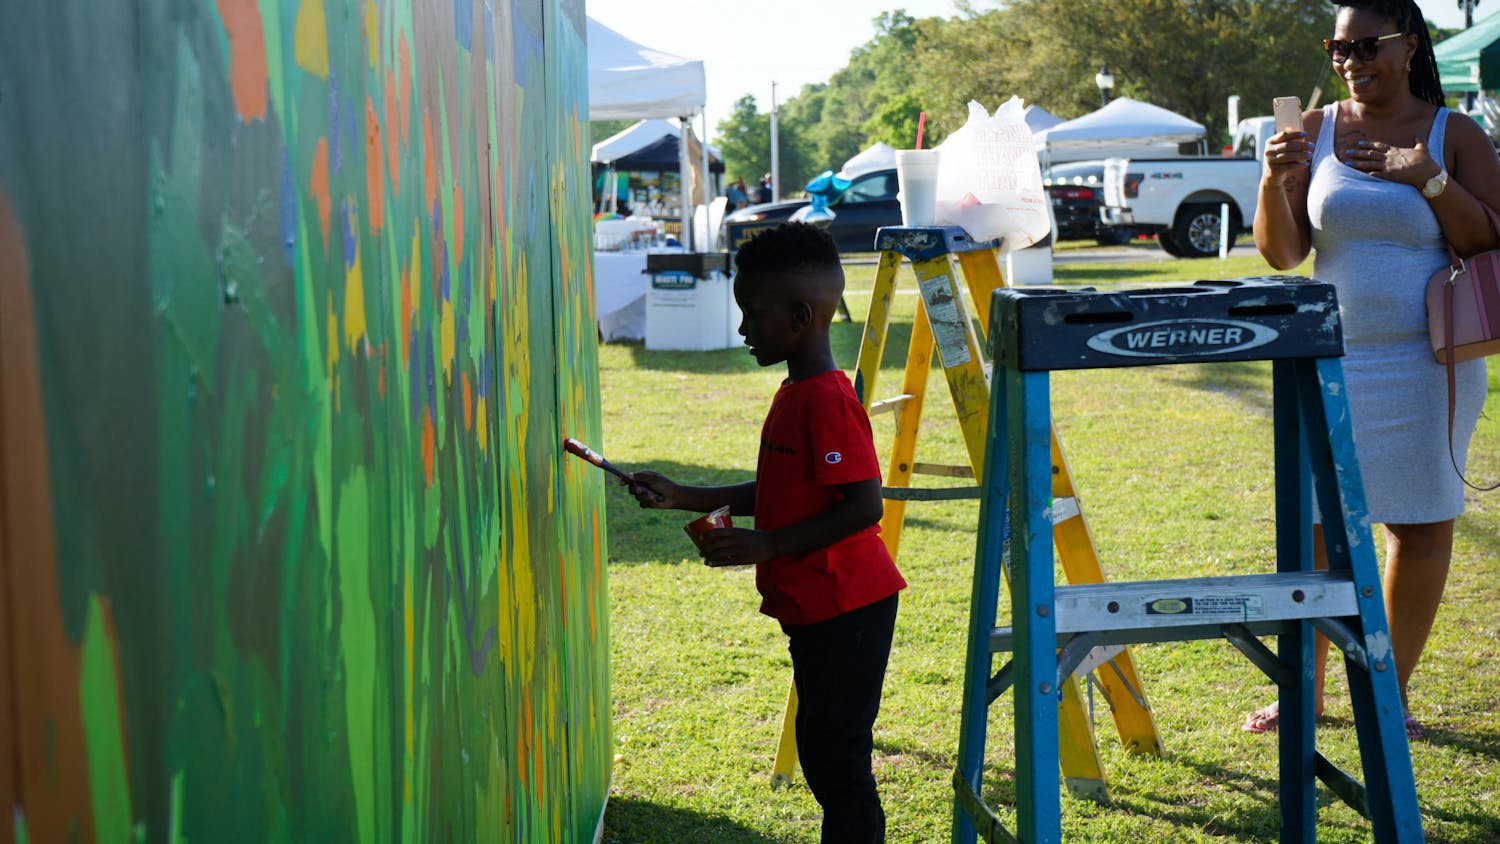 A little boy paints the kids mural setup at the Walldogs Mural Painting festival in High Springs Friday, March 24, 2023.